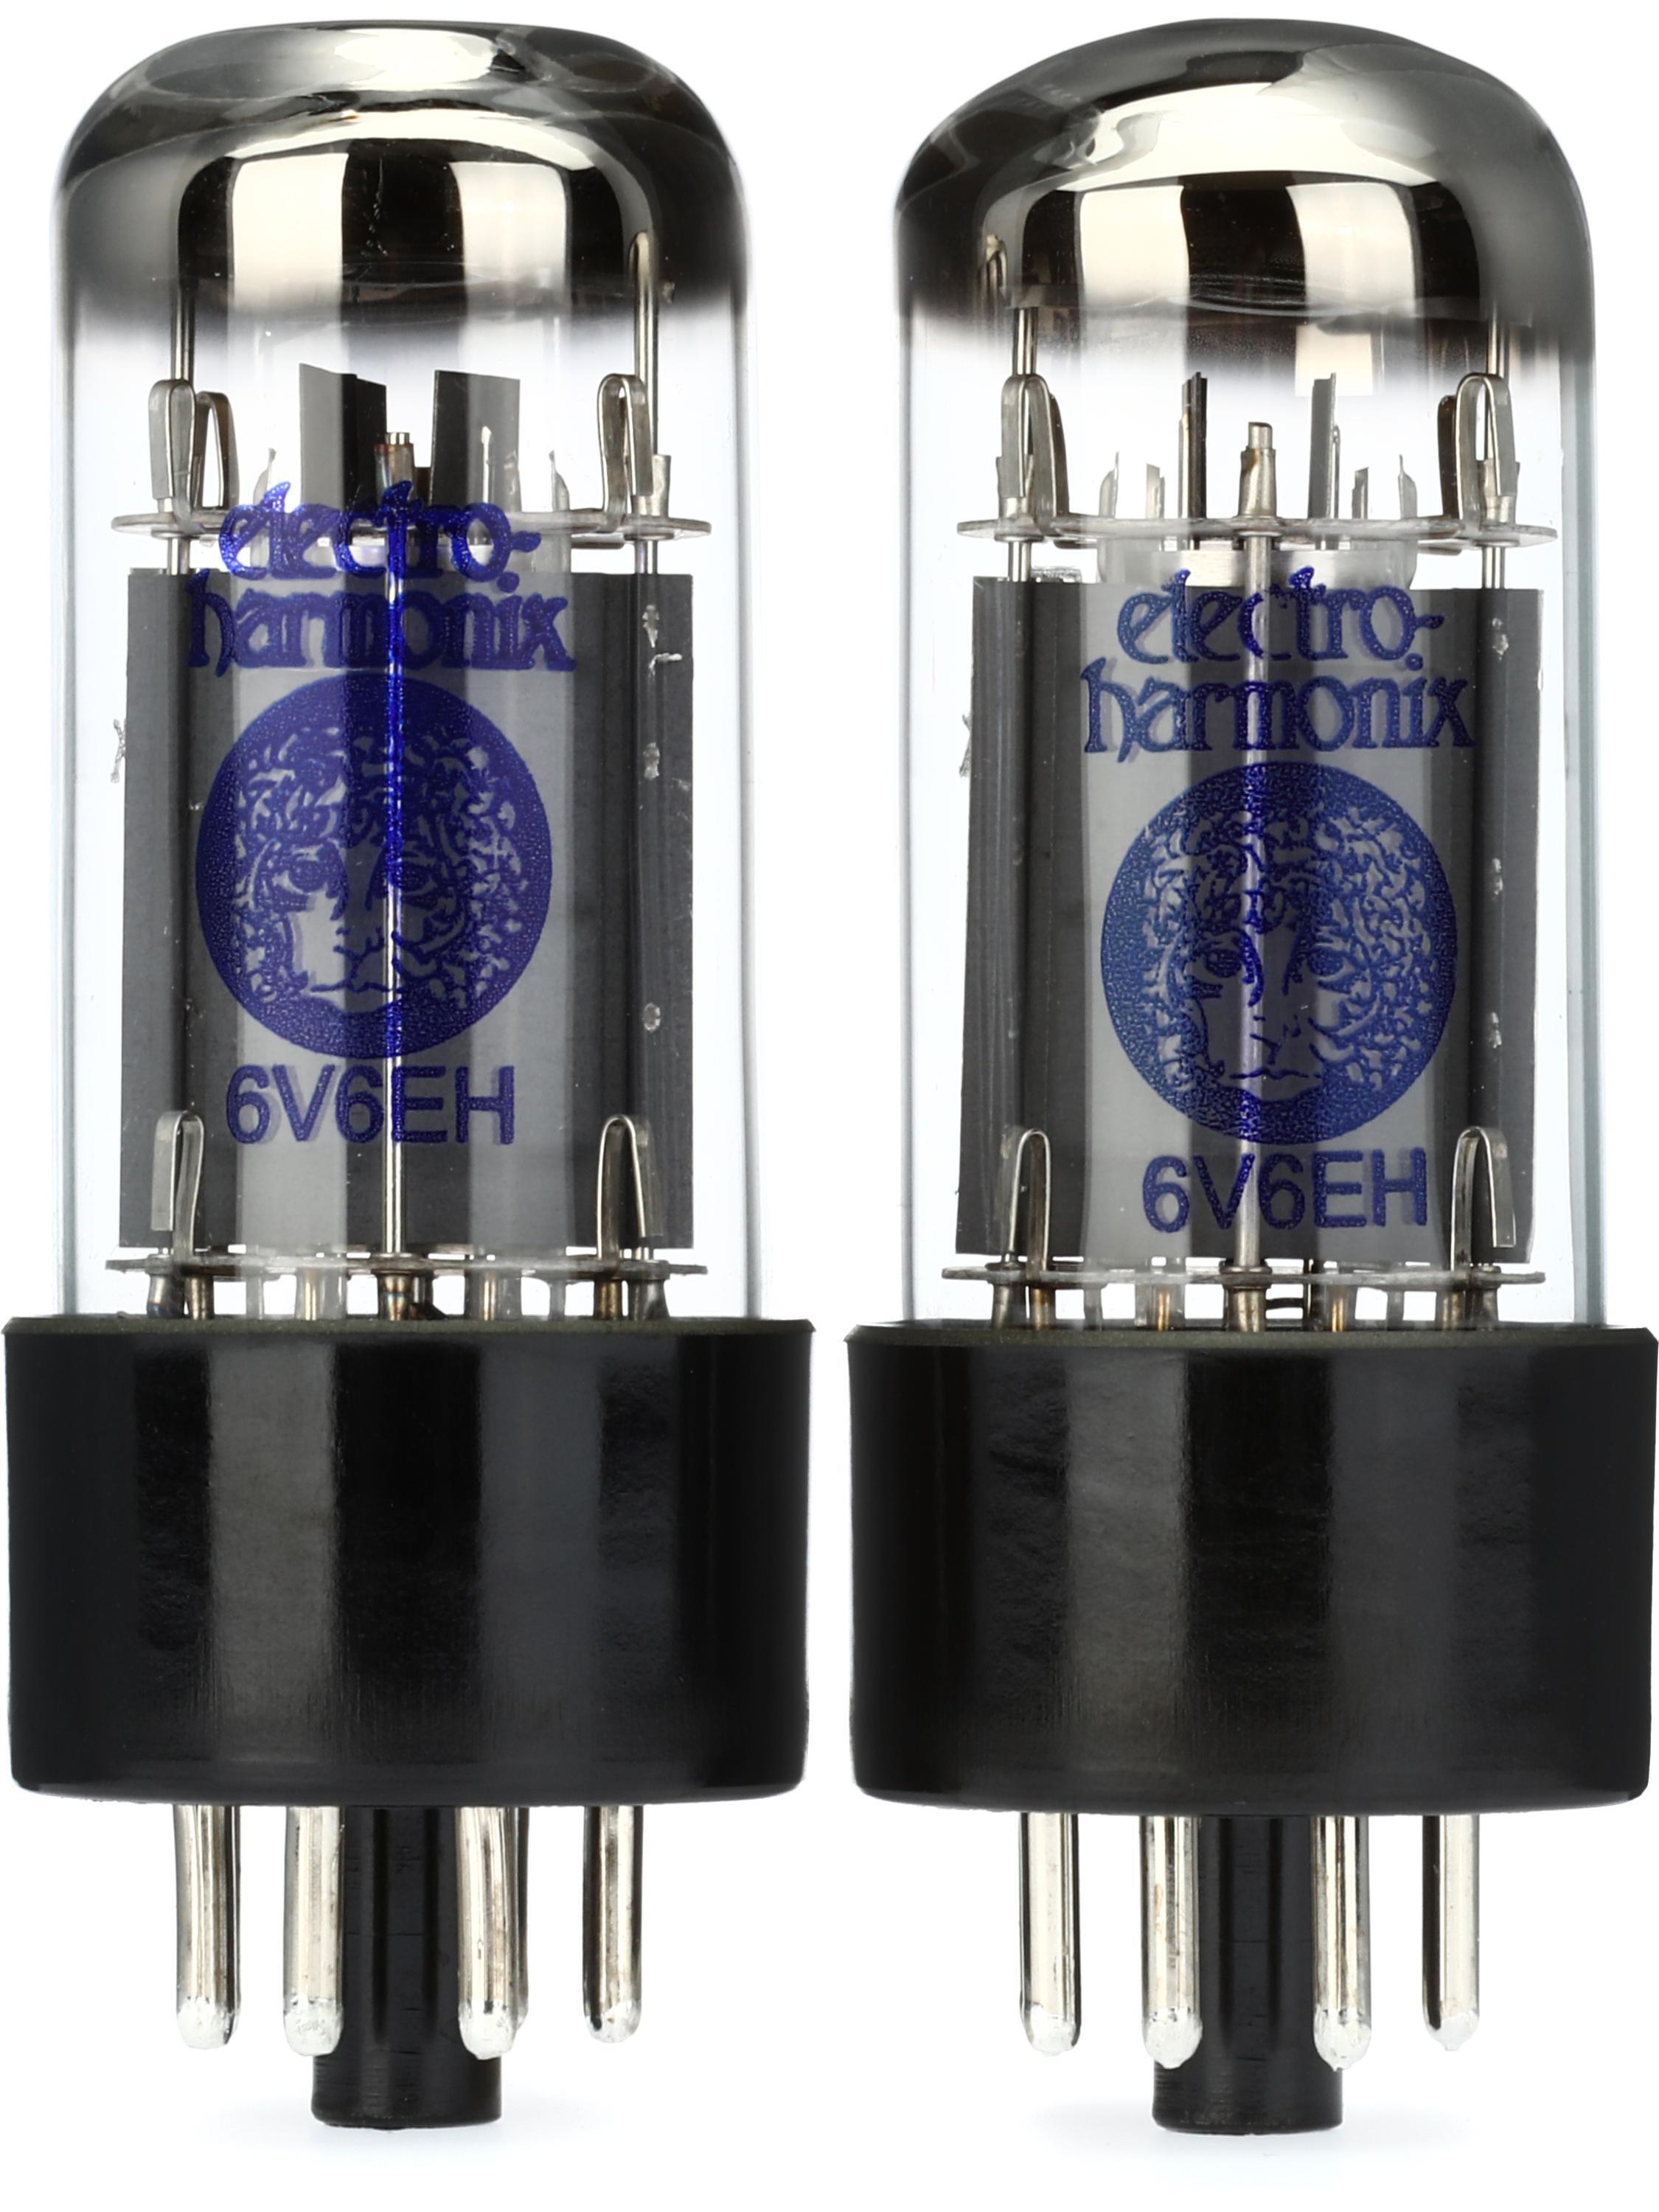 Electro-Harmonix 6V6EH Power Tubes - Matched Duet | Sweetwater